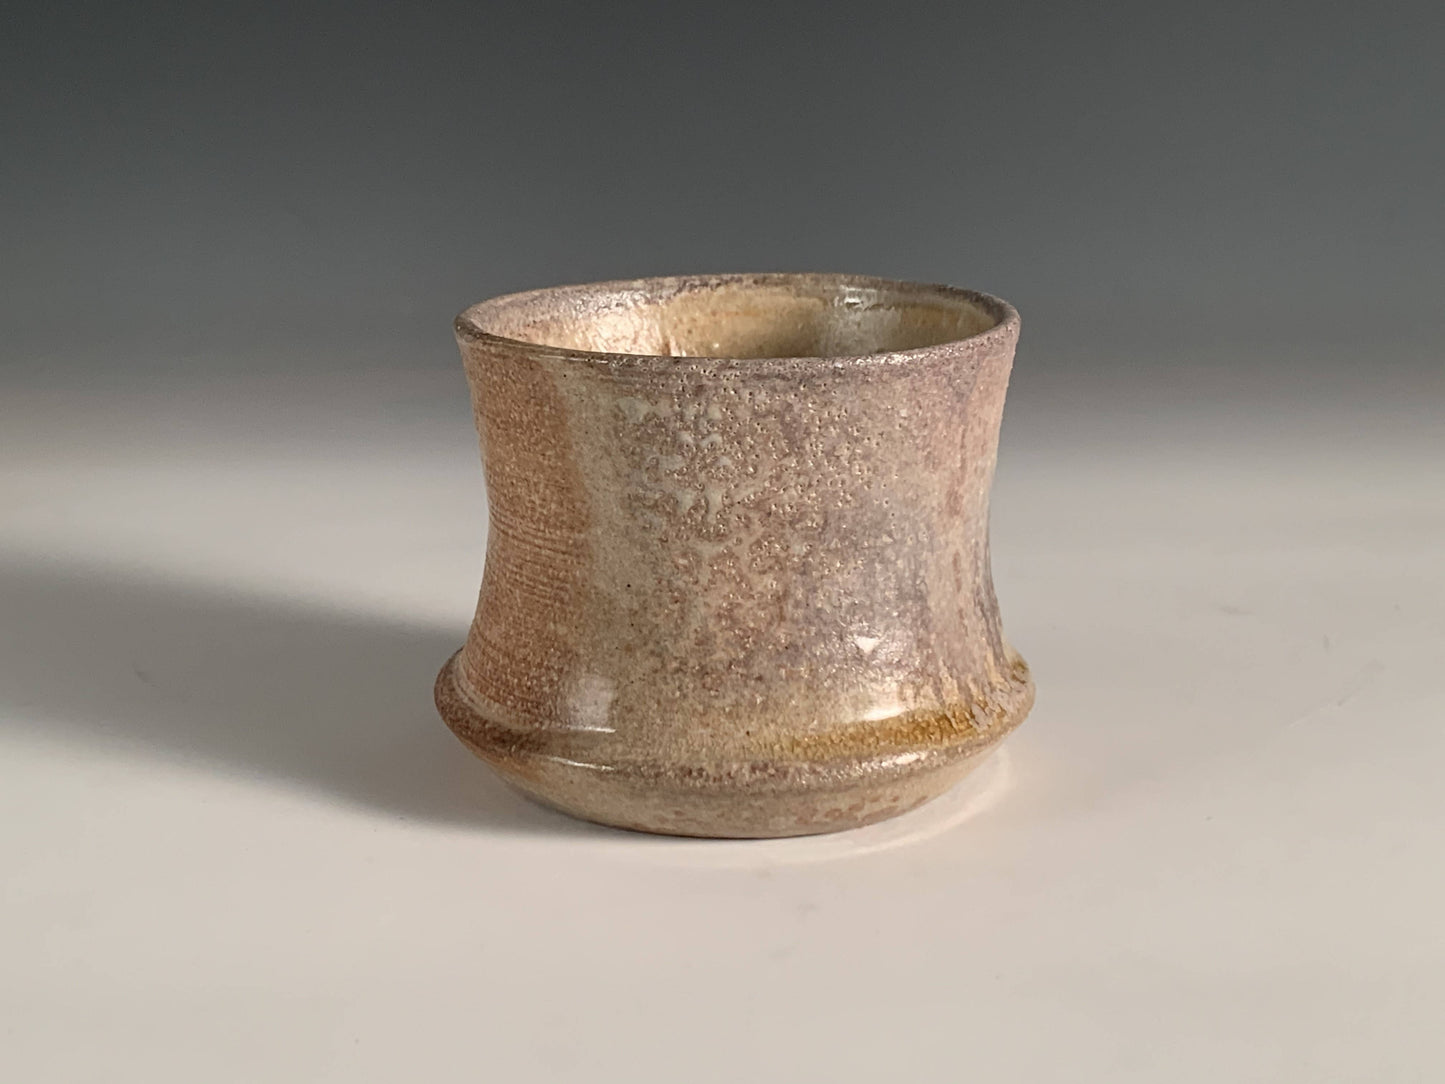 Wood Fired Ceramic Younomi (Cup)